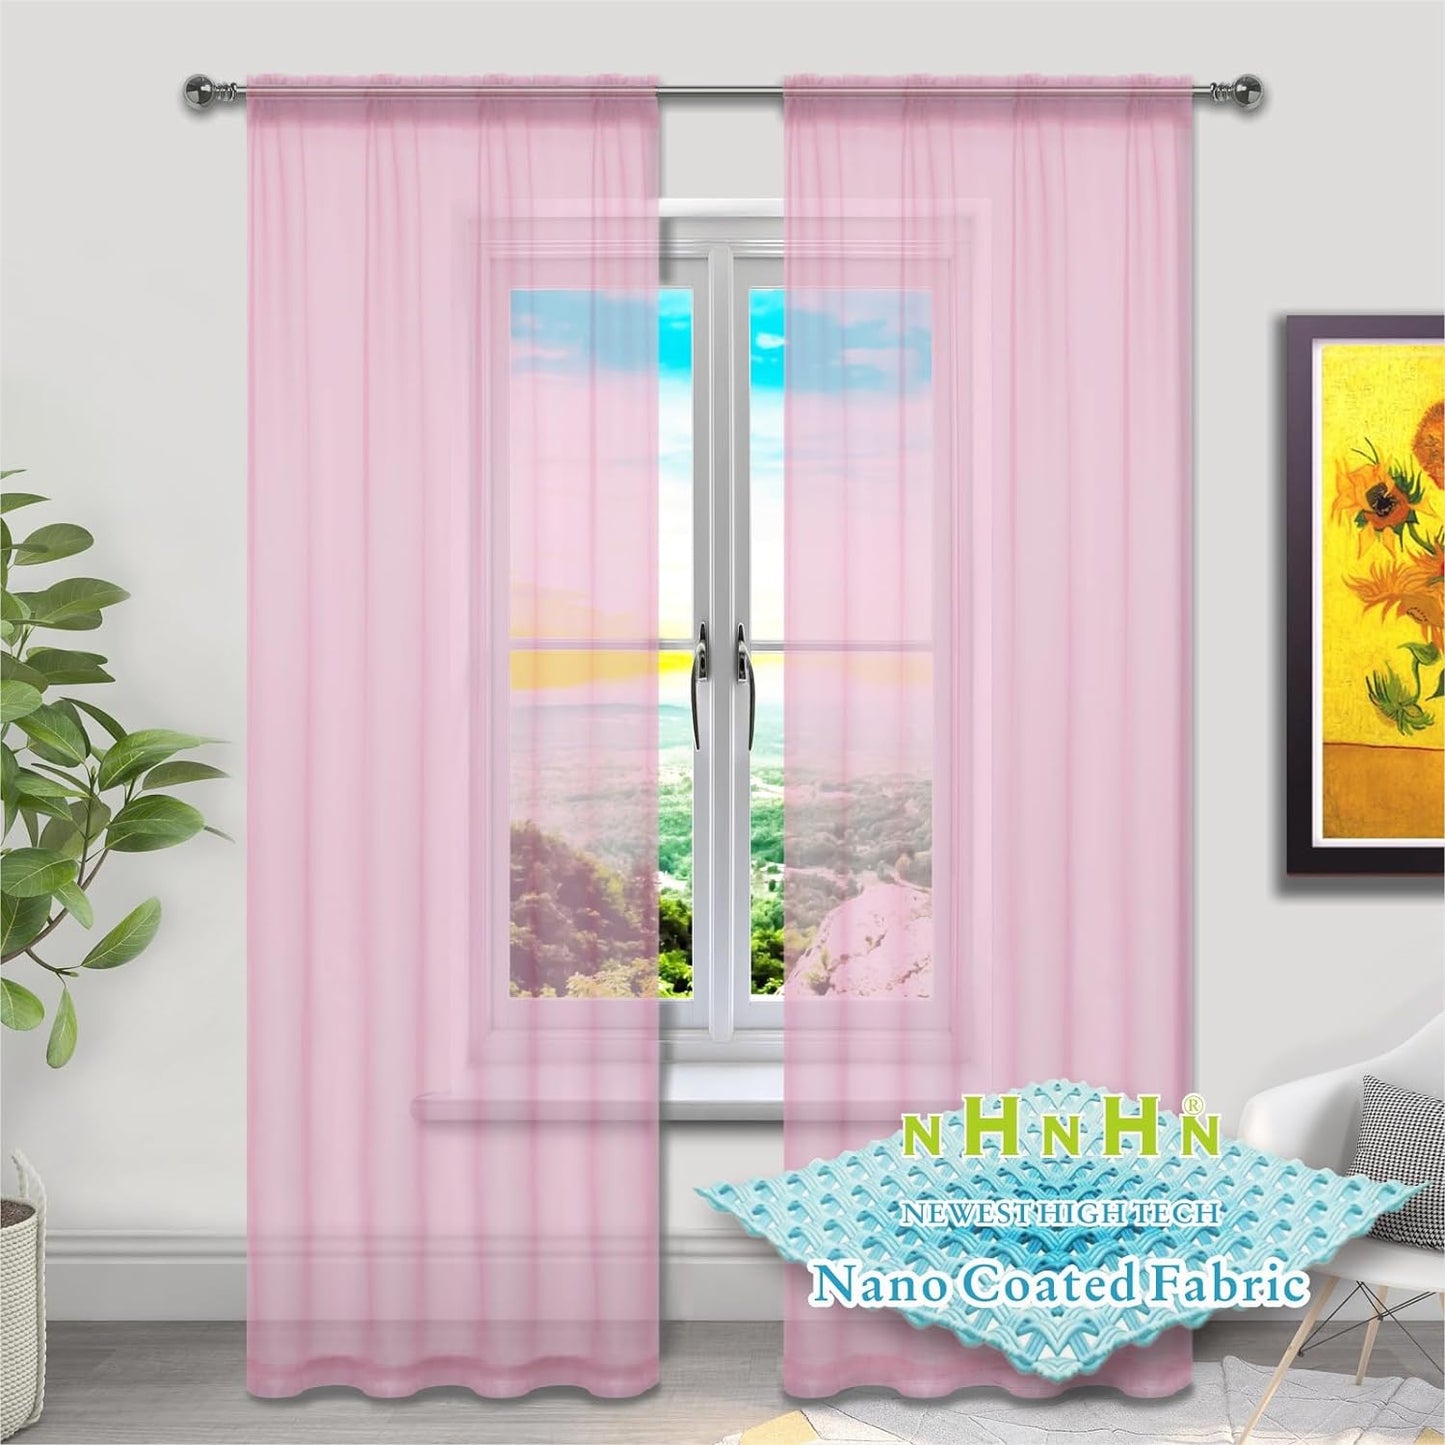 NHNHN Nano Material Coated White Sheer Curtains 84 Inches Long, Rod Pocket Window Drapes Voile Sheer Curtain 2 Panels for Living Room Bedroom Kitchen (White, W52 X L84)  NHNHN Pink 52W X 72L | 2 Panels 